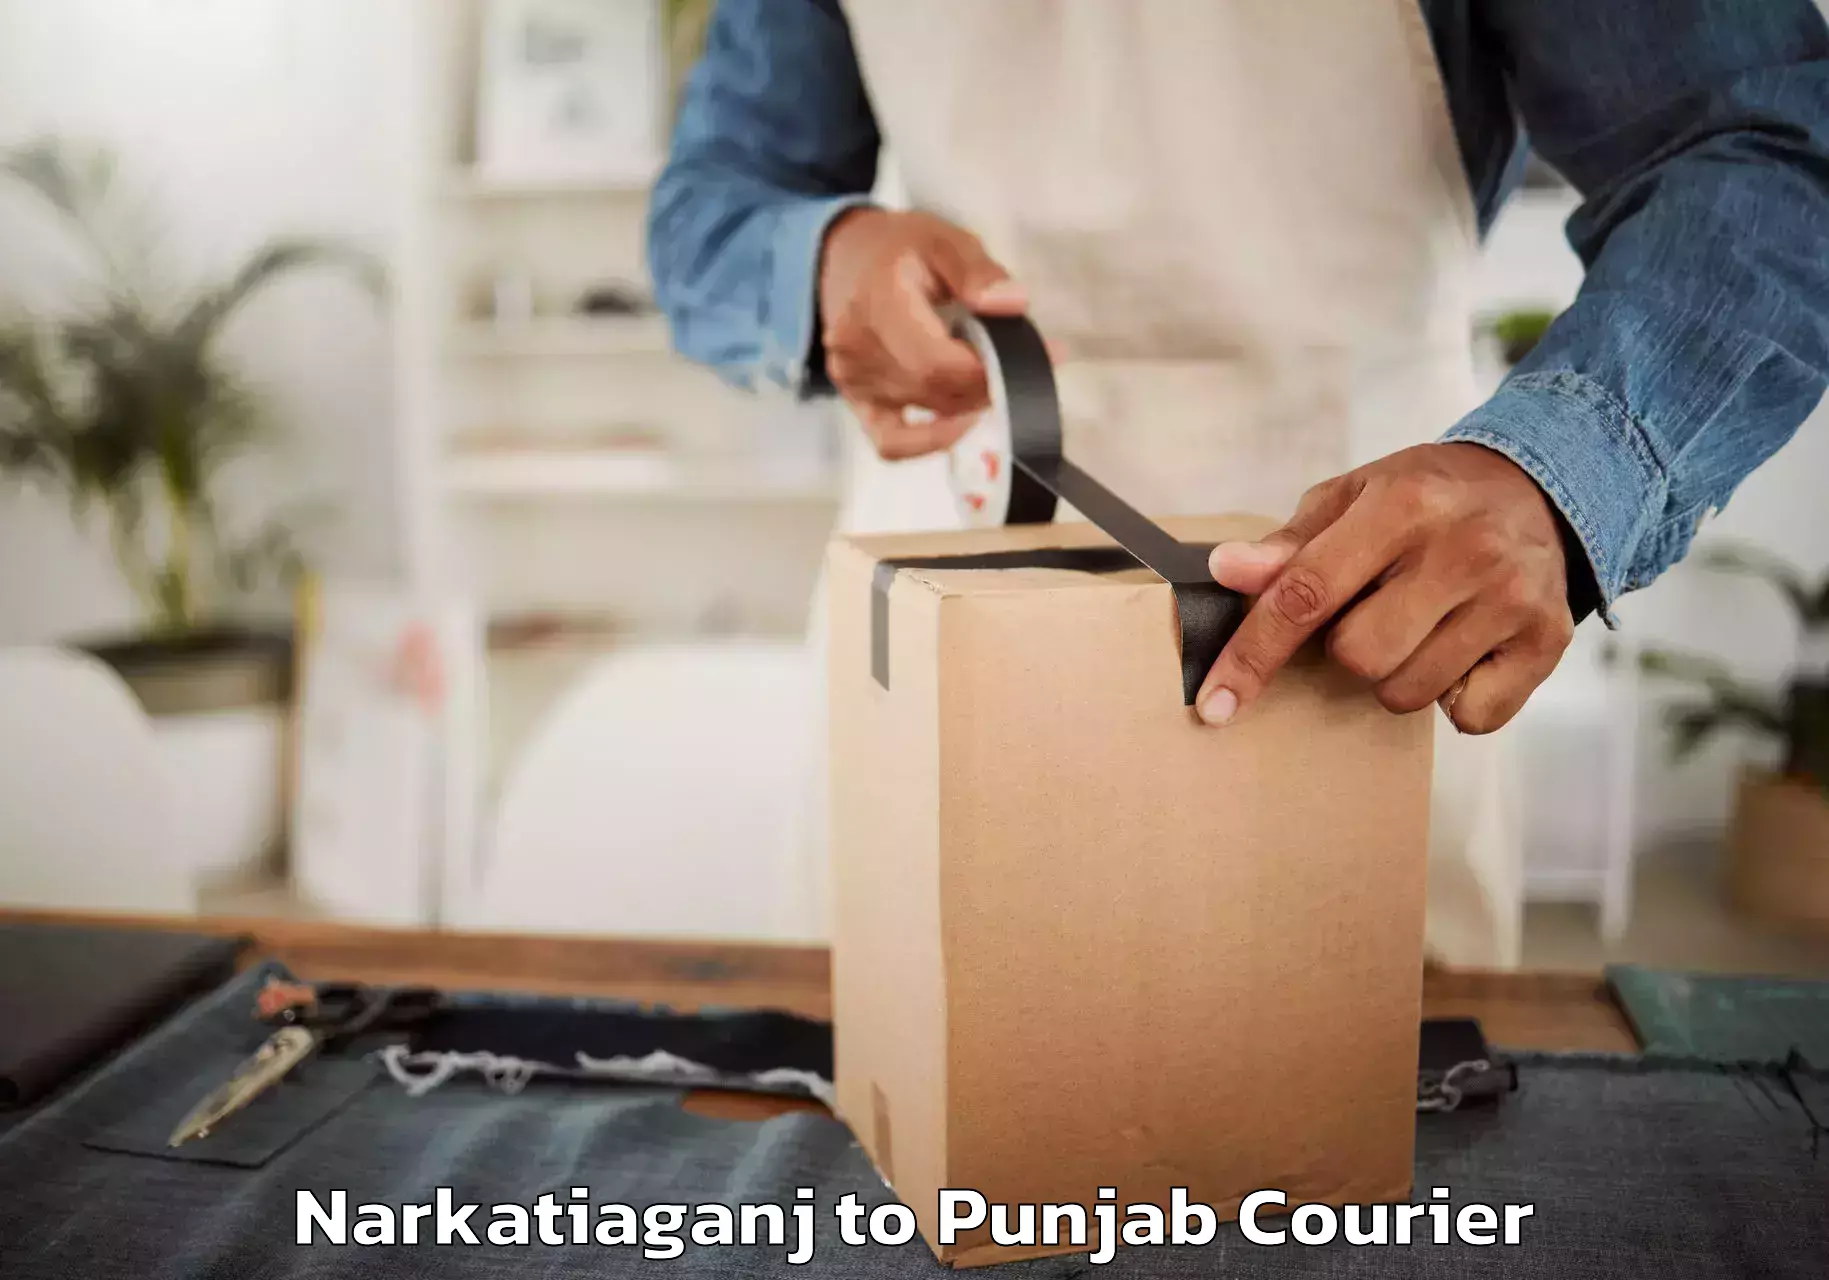 Quality relocation assistance Narkatiaganj to Zirakpur